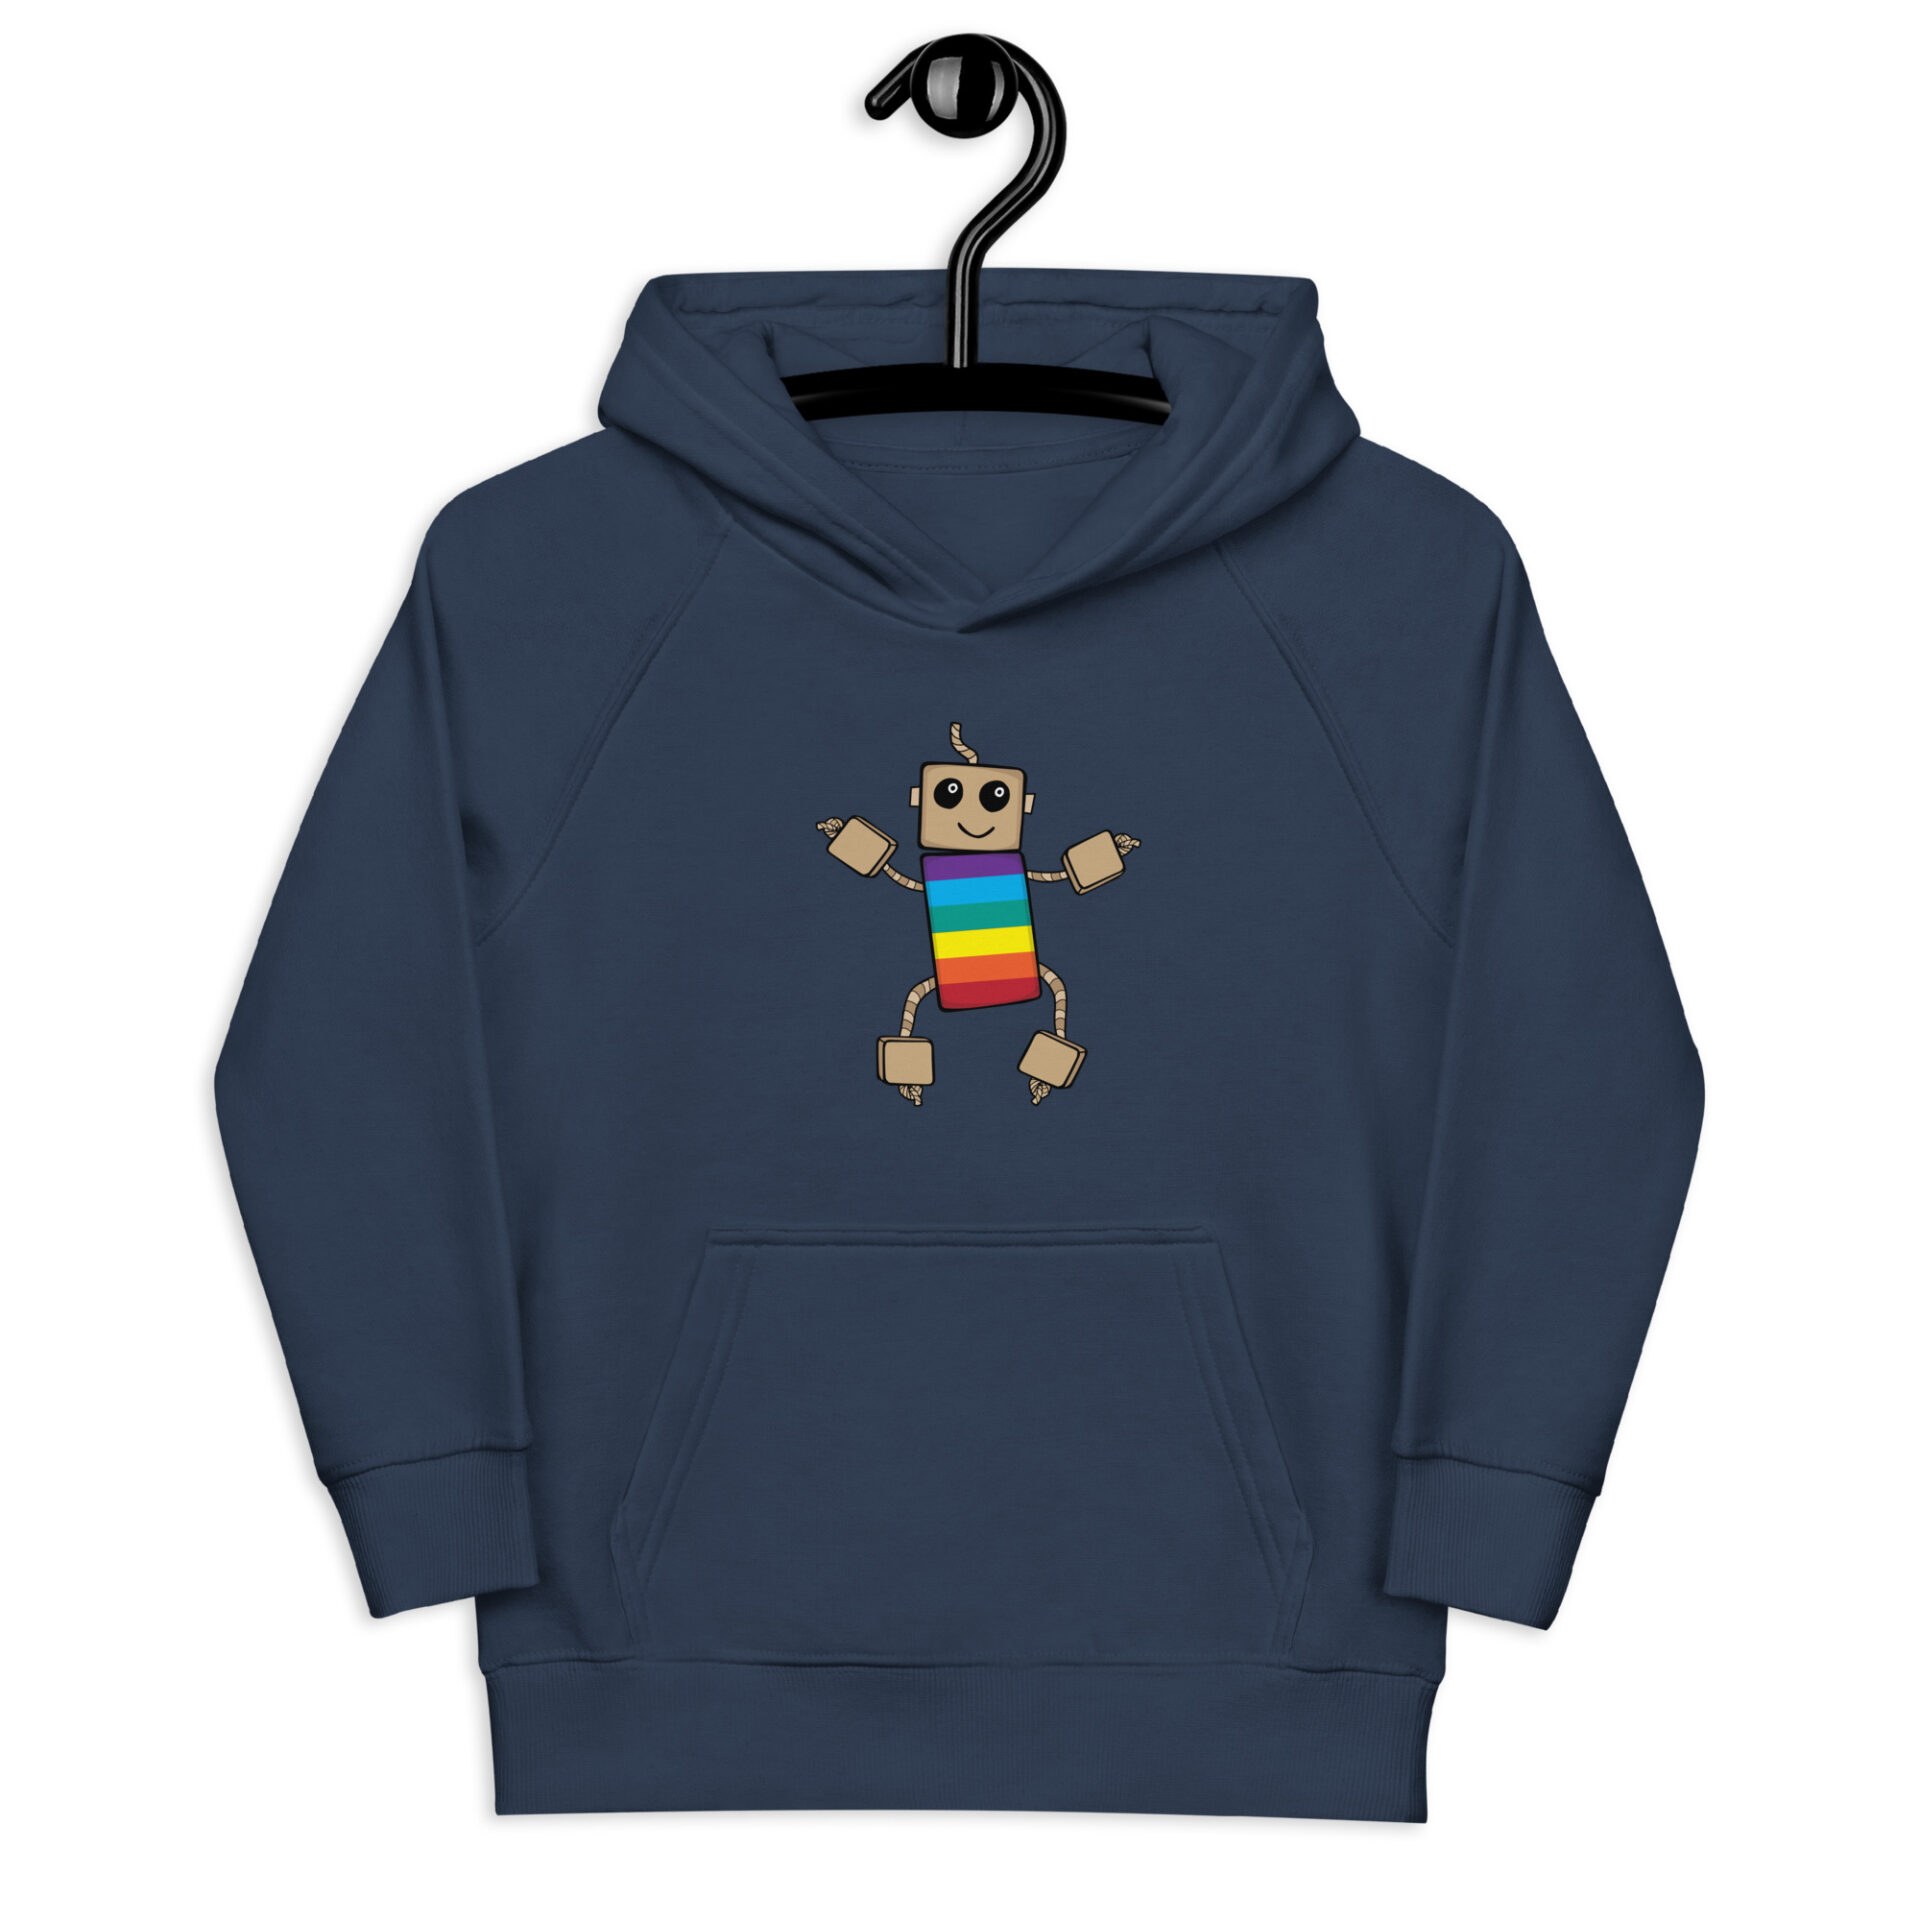 Navy hoodie with rainbow ned